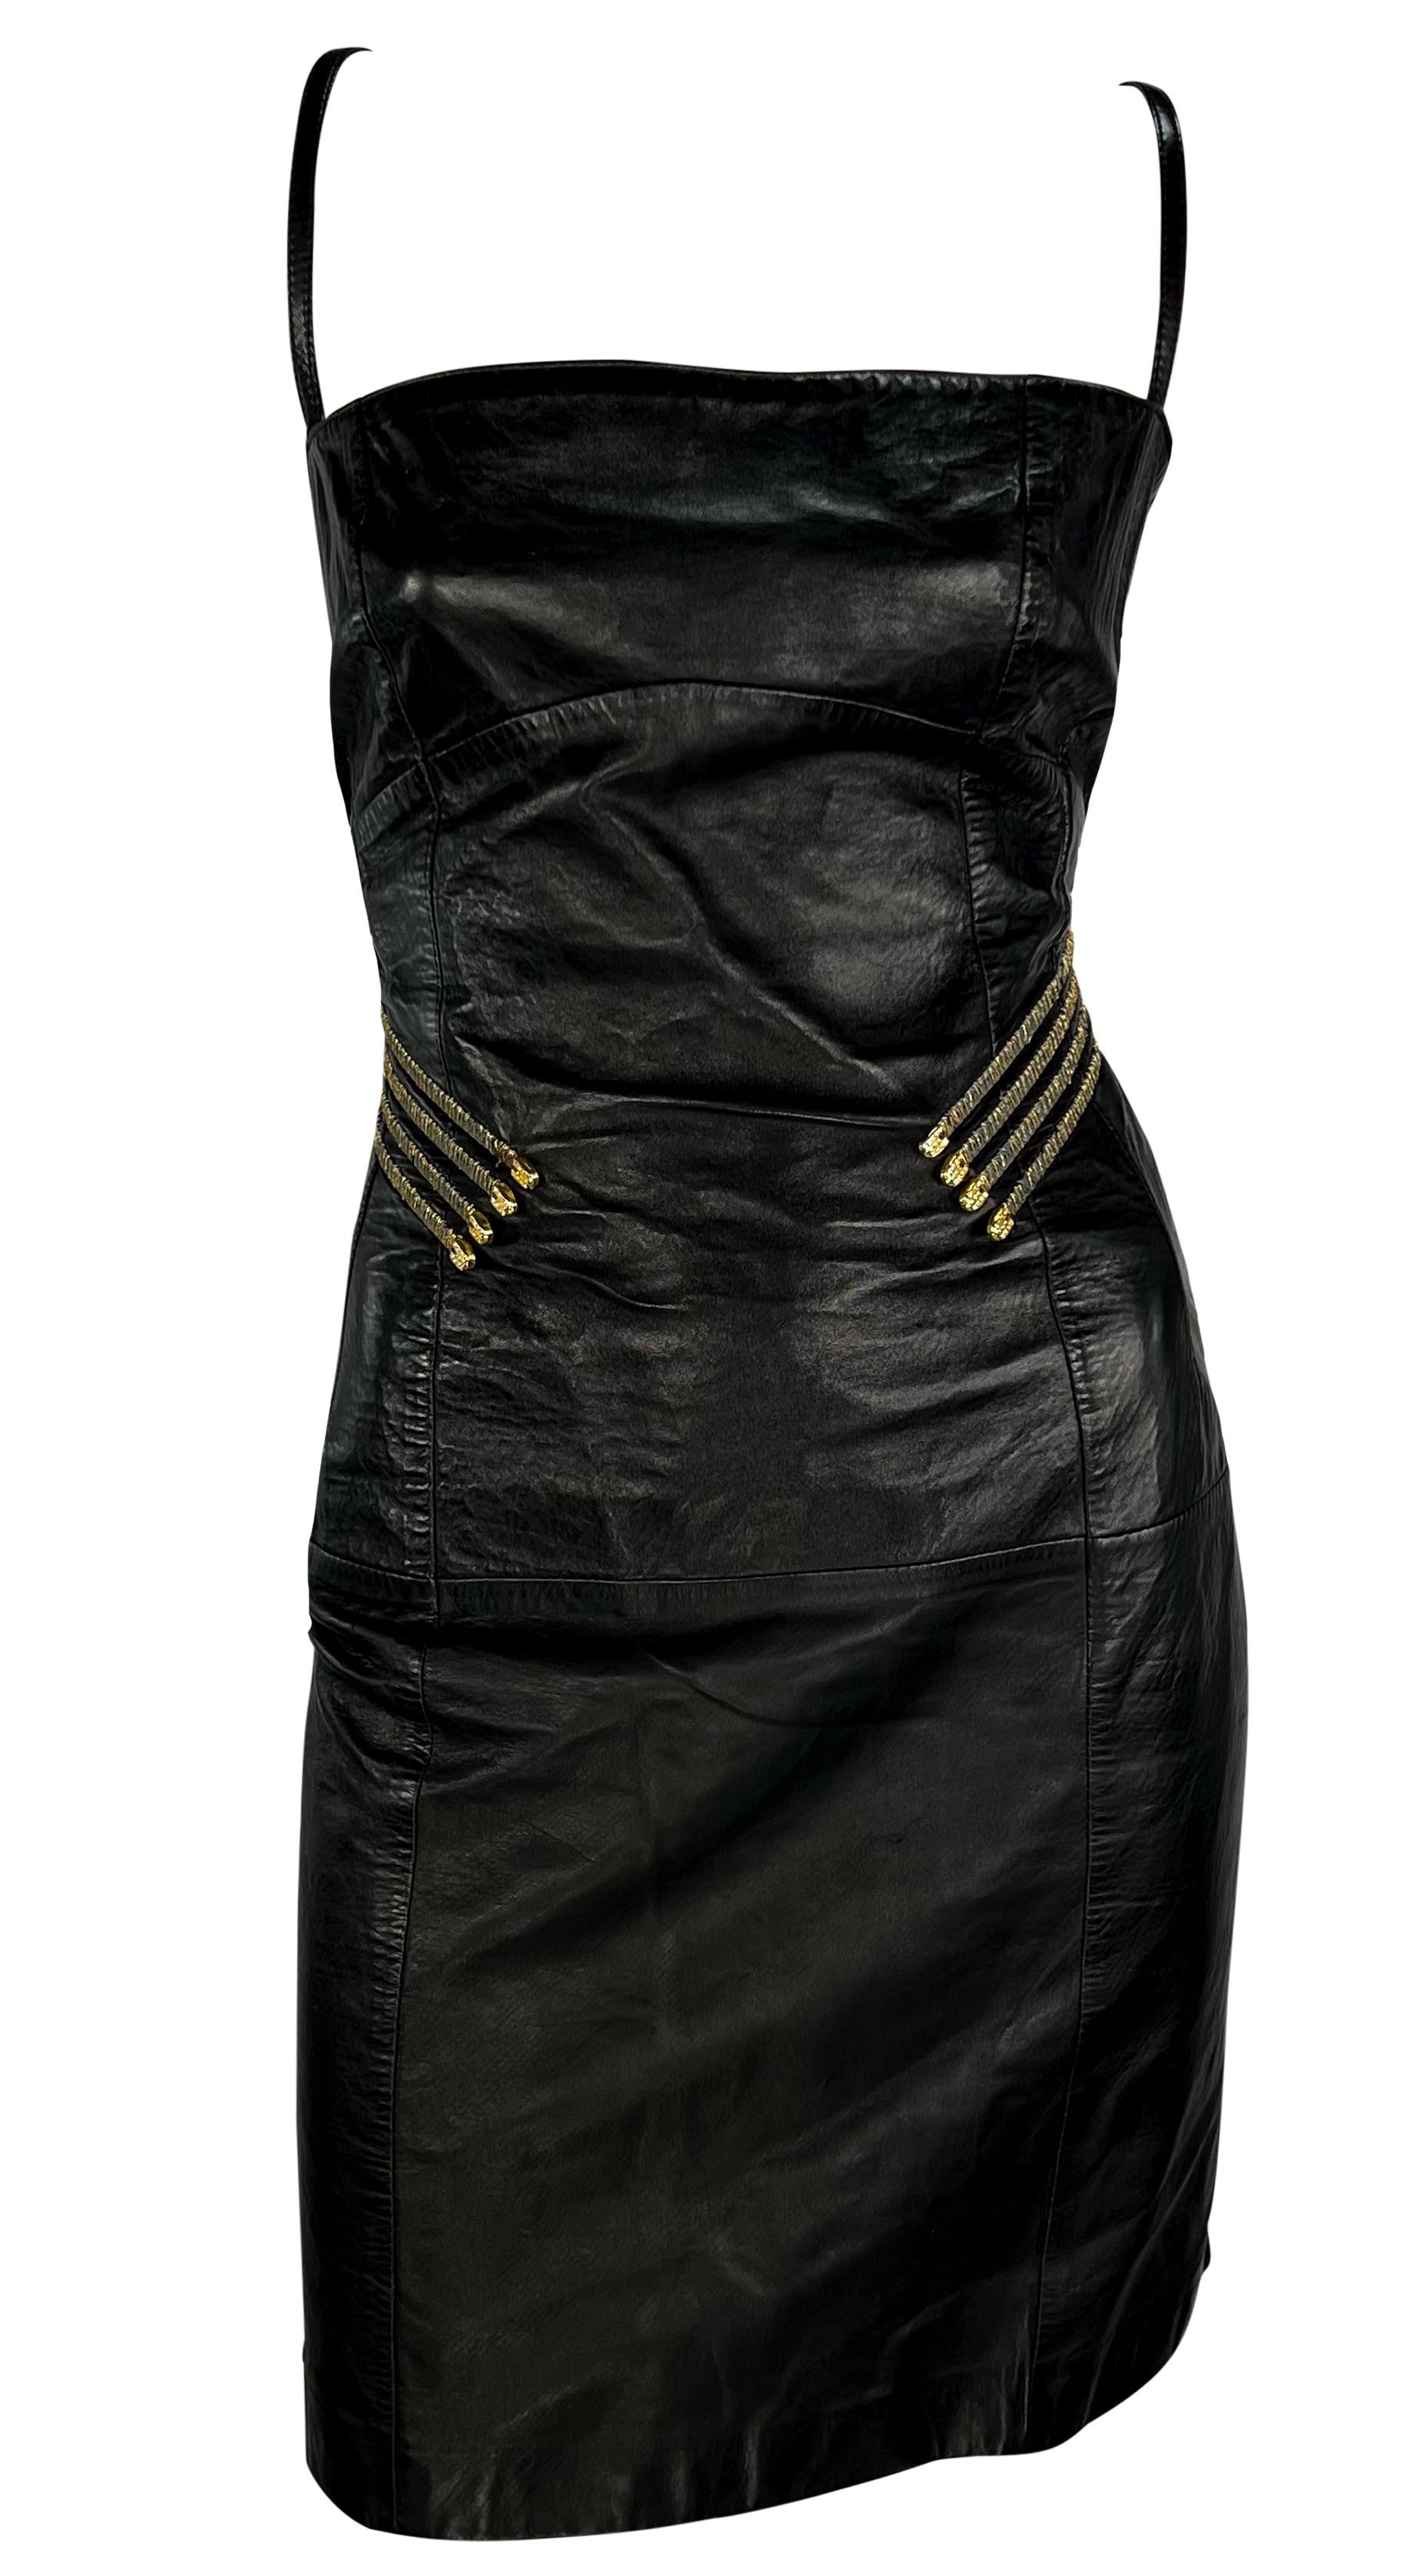 S/S 1995 Gianfranco Ferré Rhinestone Gold Corset Boned Black Leather Mini Dress In Excellent Condition For Sale In West Hollywood, CA